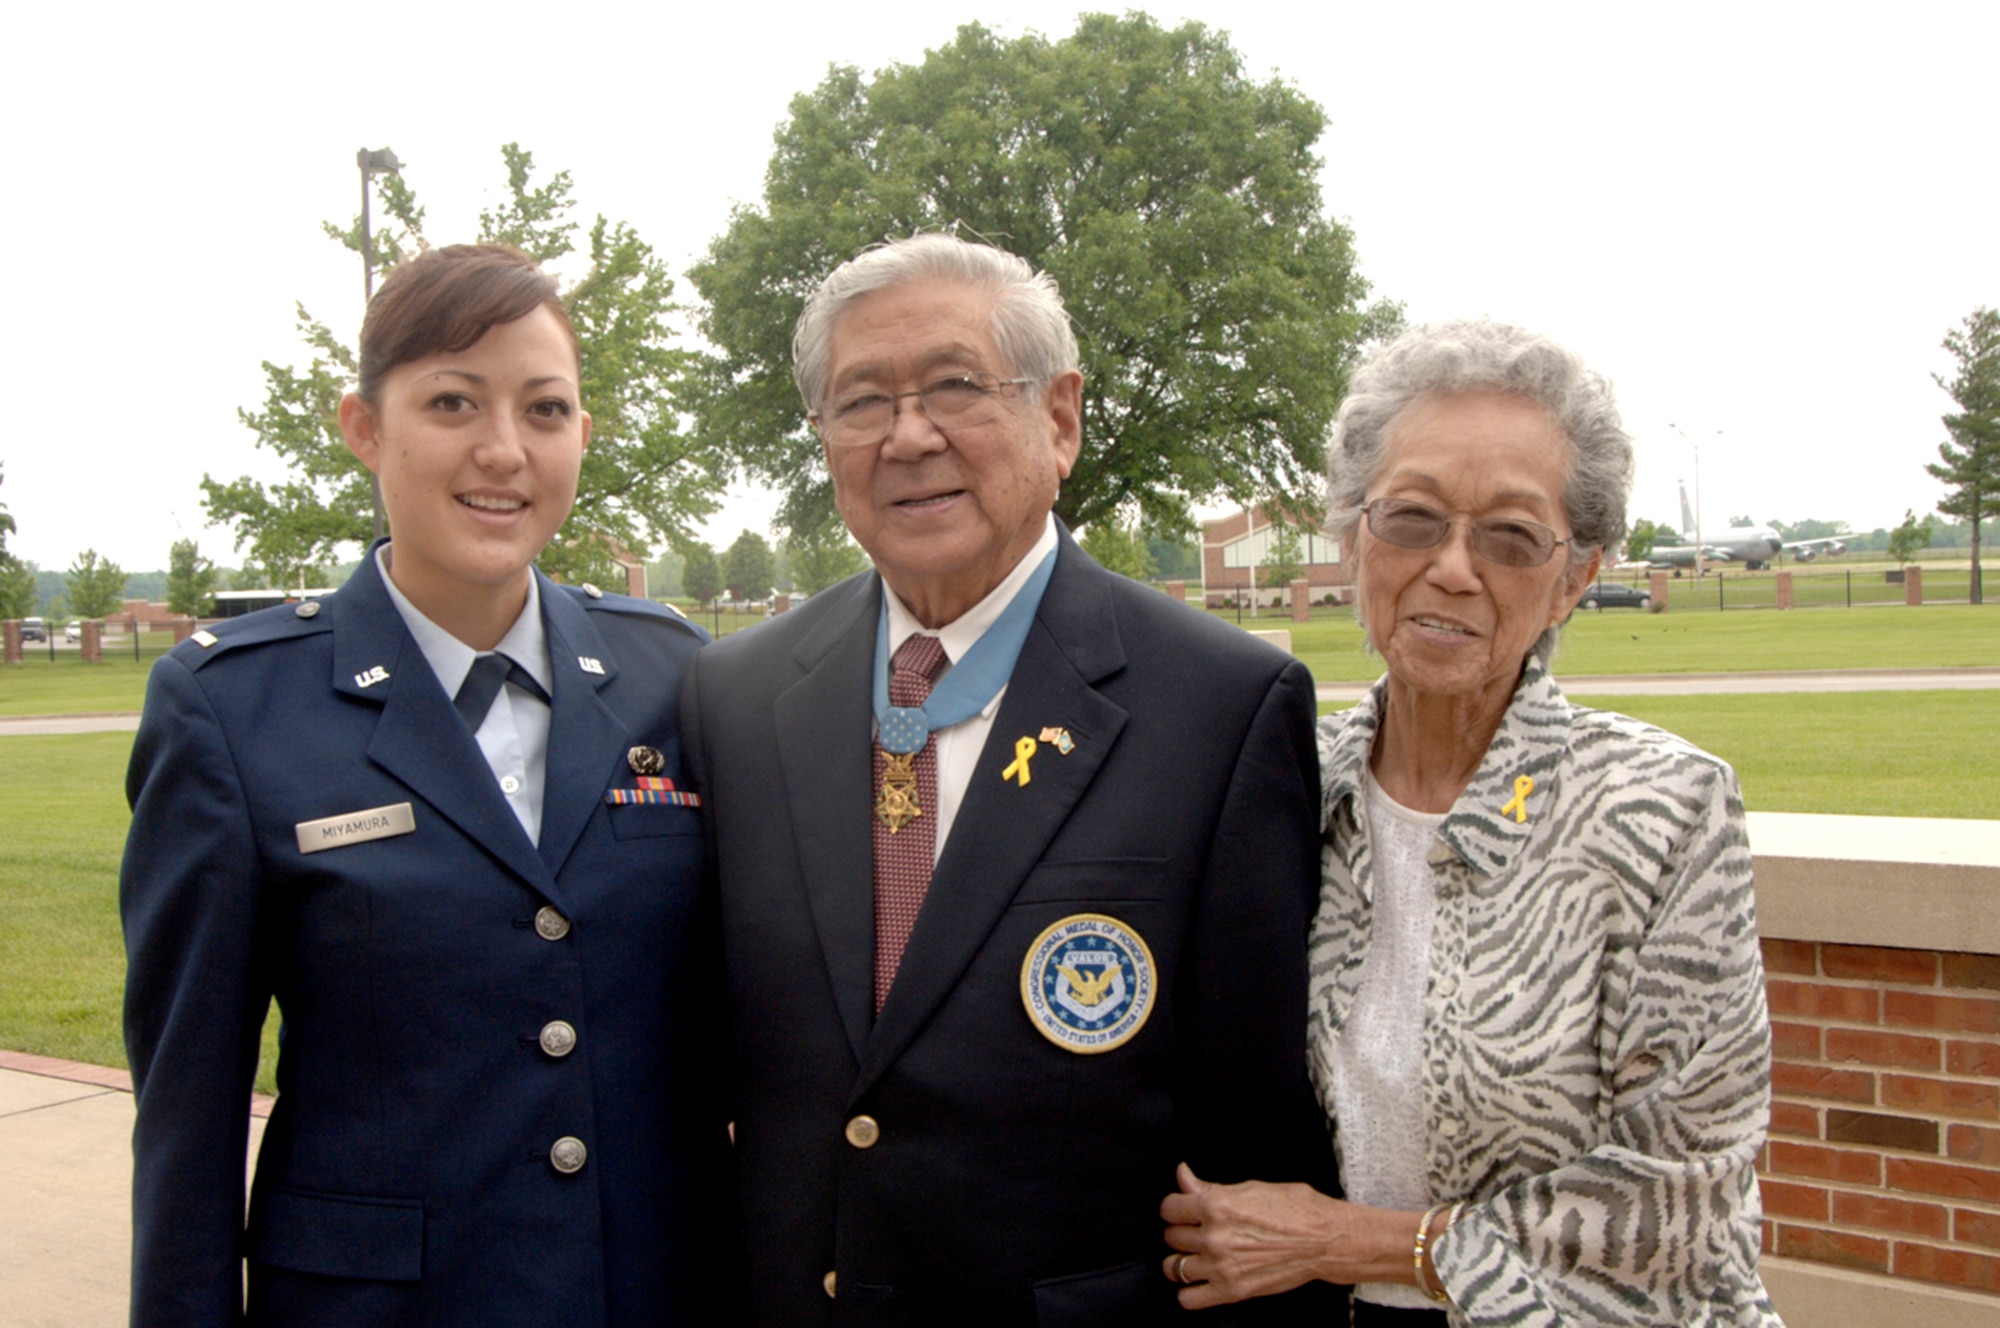 Medal of Honor recipient Hiroshi Miyamura stands with 2nd Lt. Marisa Miyamura, his granddaughter, and Terry, his wife of 62 years May 17, 2010, at Scott Air Force Base, Ill. Mr. Miyamura shared his experiences as a Korean War veteran and POW with members at Scott AFB as part of Asian-Pacific American Heritage Month celebrations. Lieutenant Miyamura is a communications officer assigned to Scott AFB. (U.S. Air Force photo/Karen Petitt)